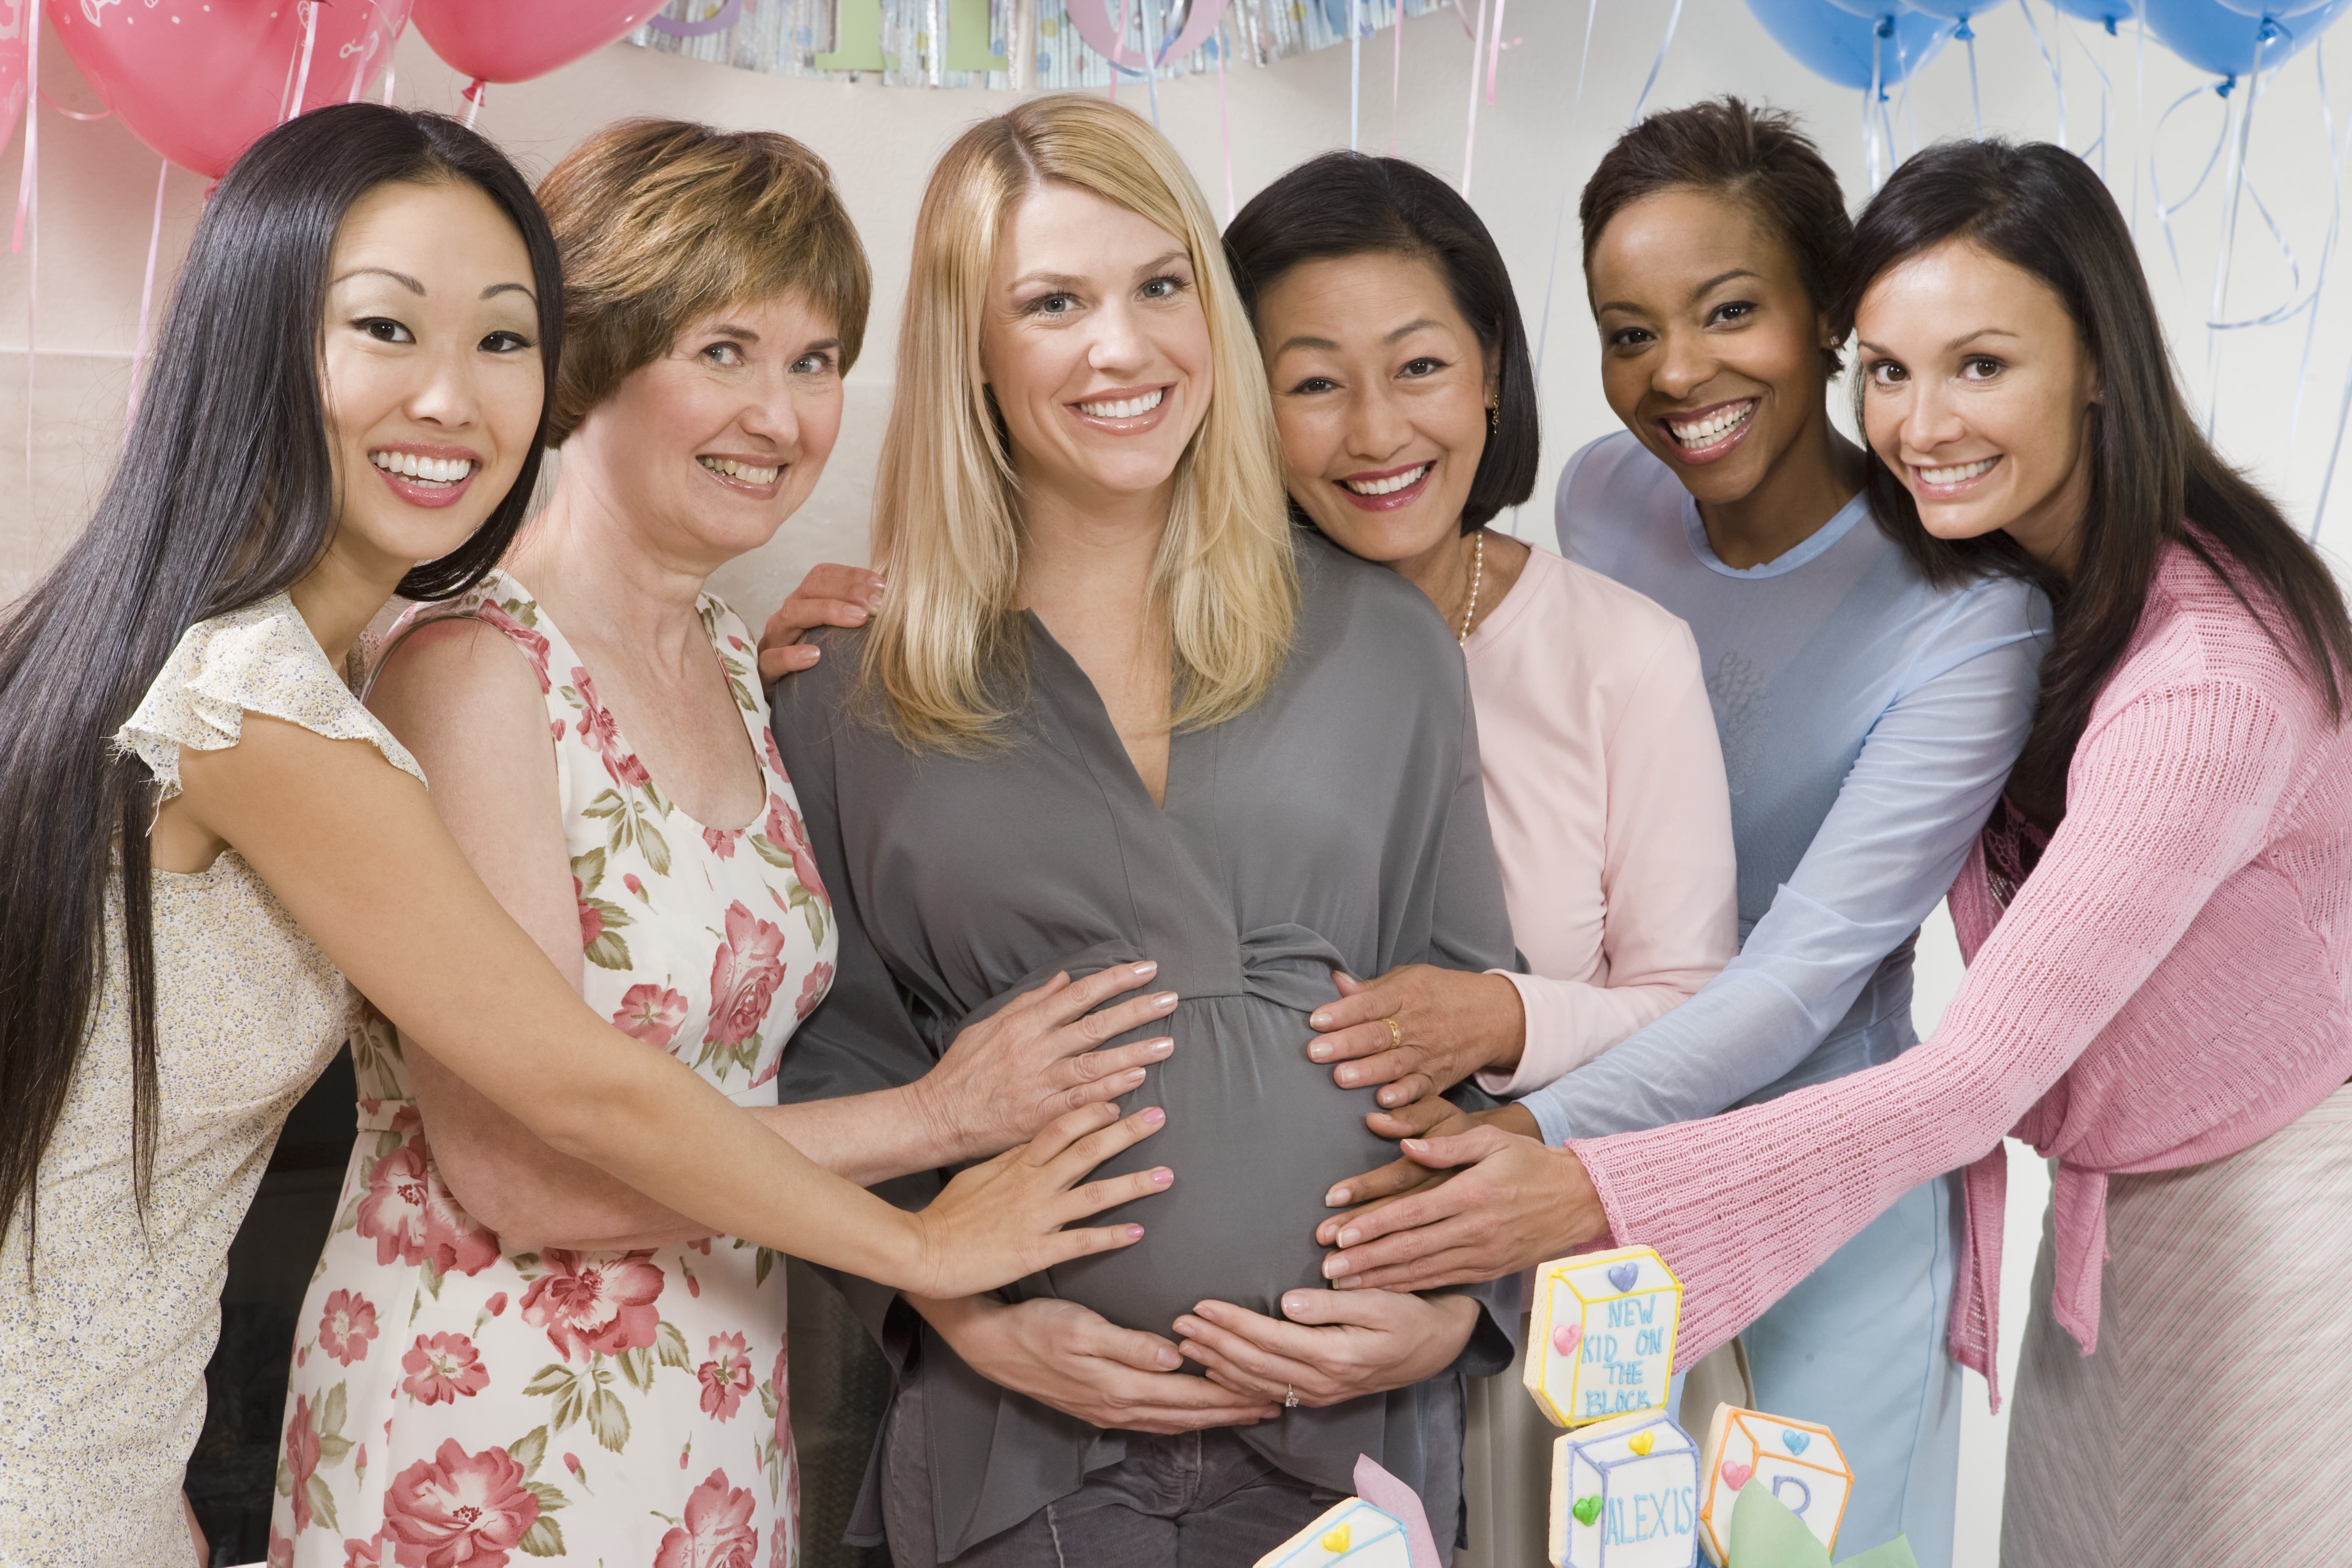 You are currently viewing Unique Baby Shower Ideas for an Expectant Friend